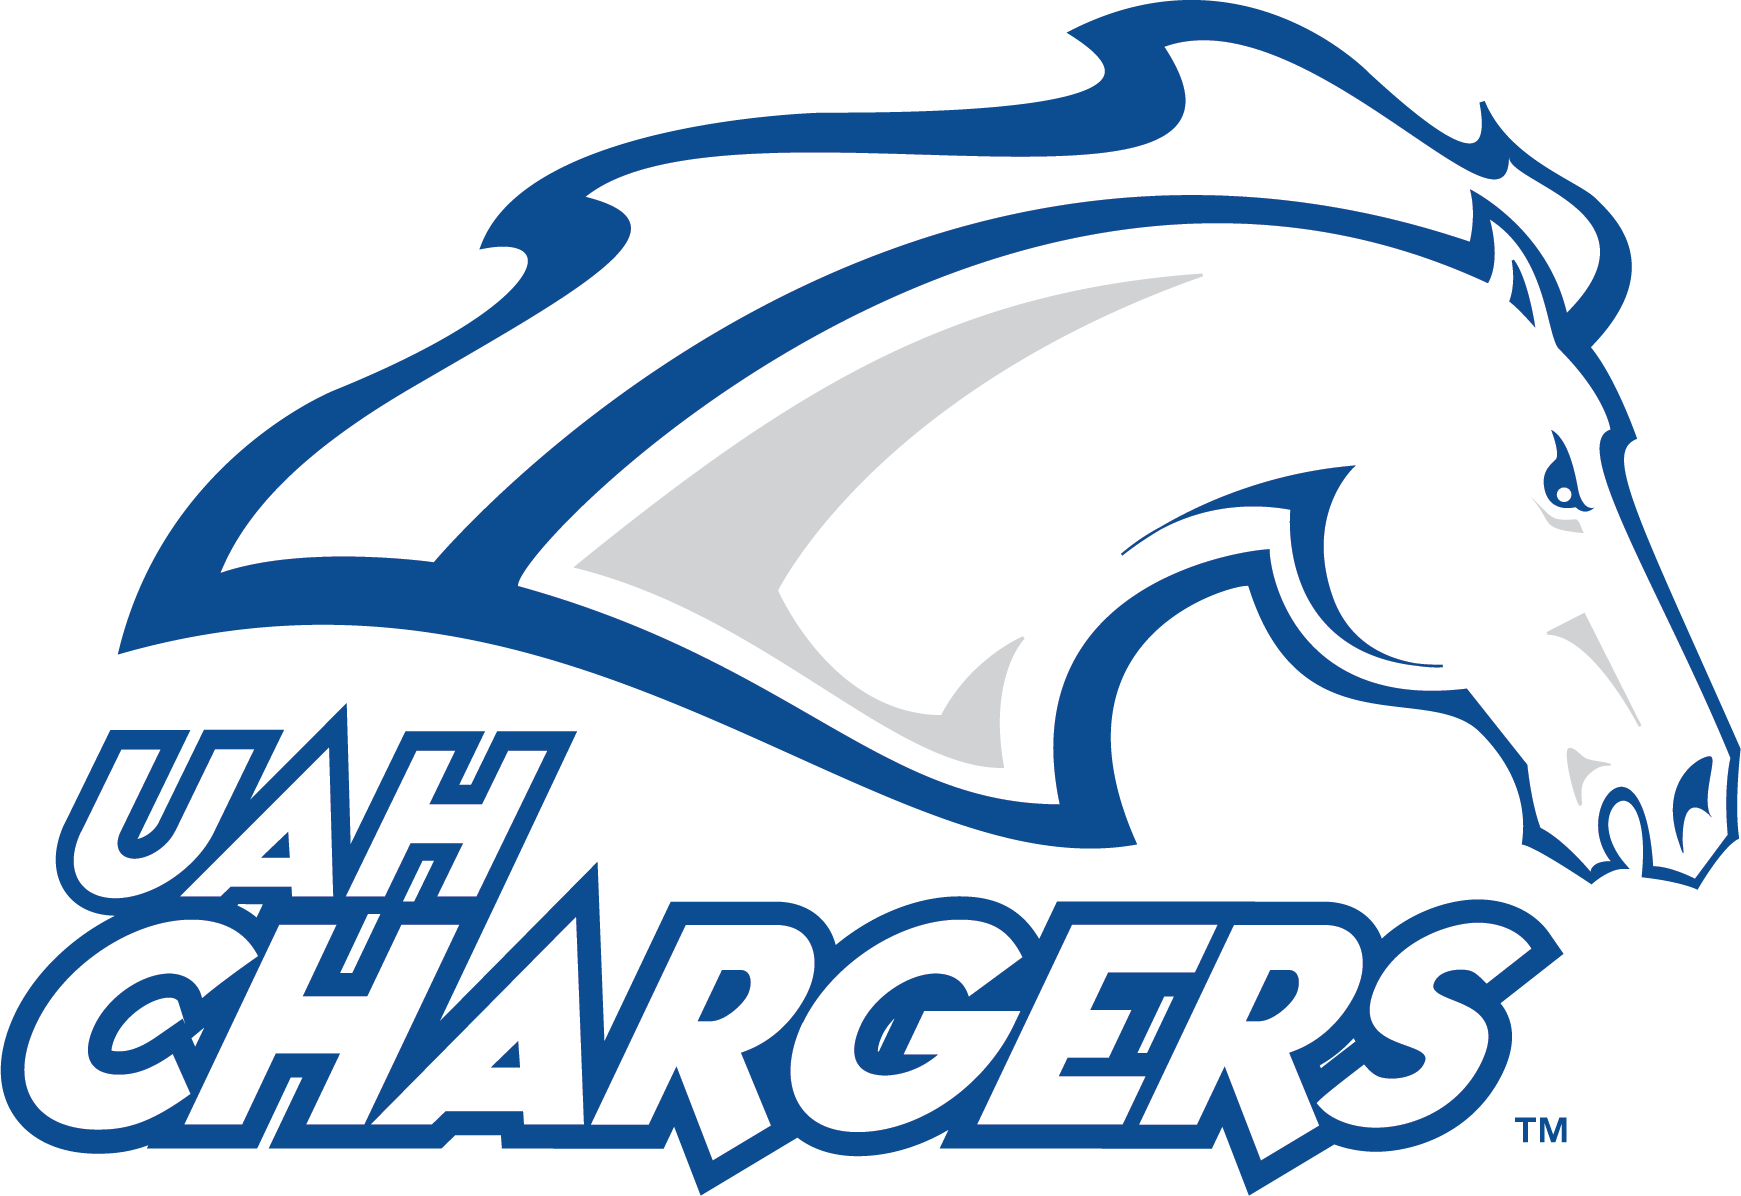 uah chargers logo